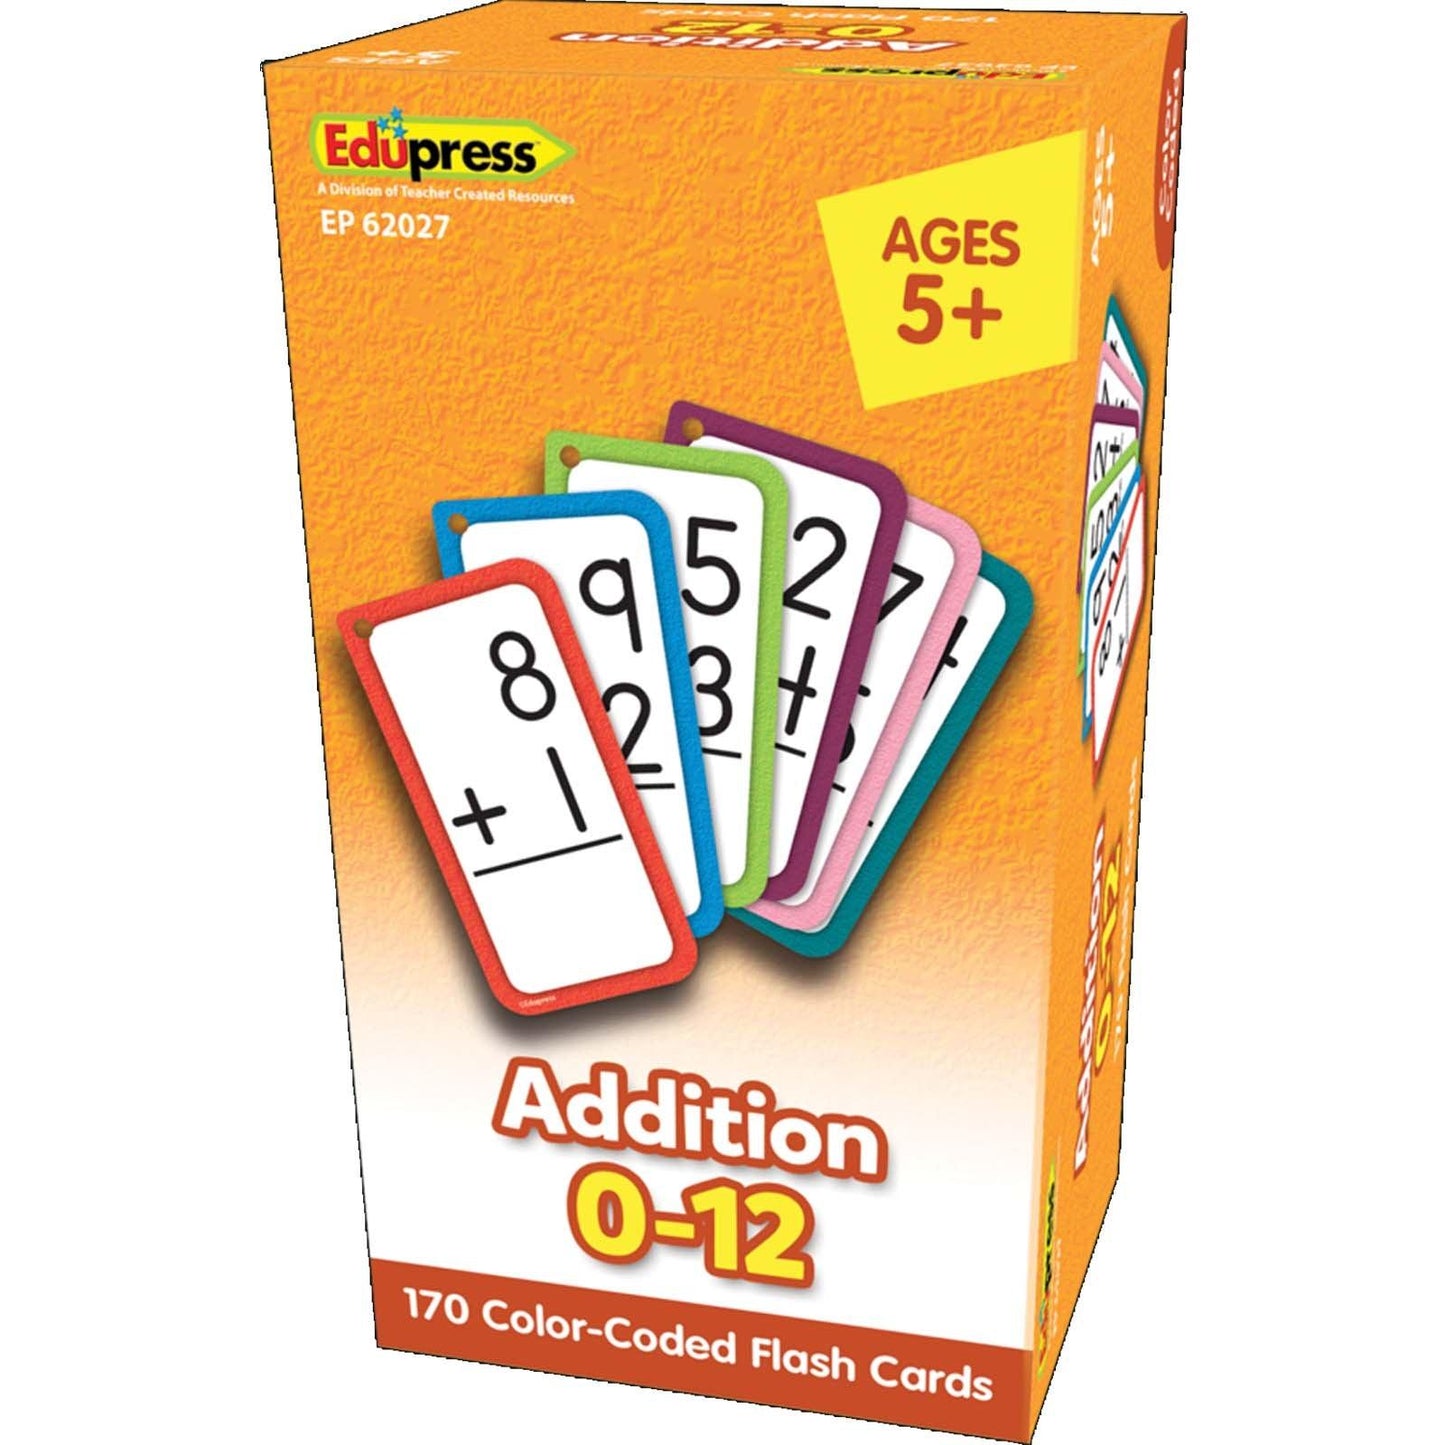 Addition Flash Cards - All Facts 0-12 - Loomini